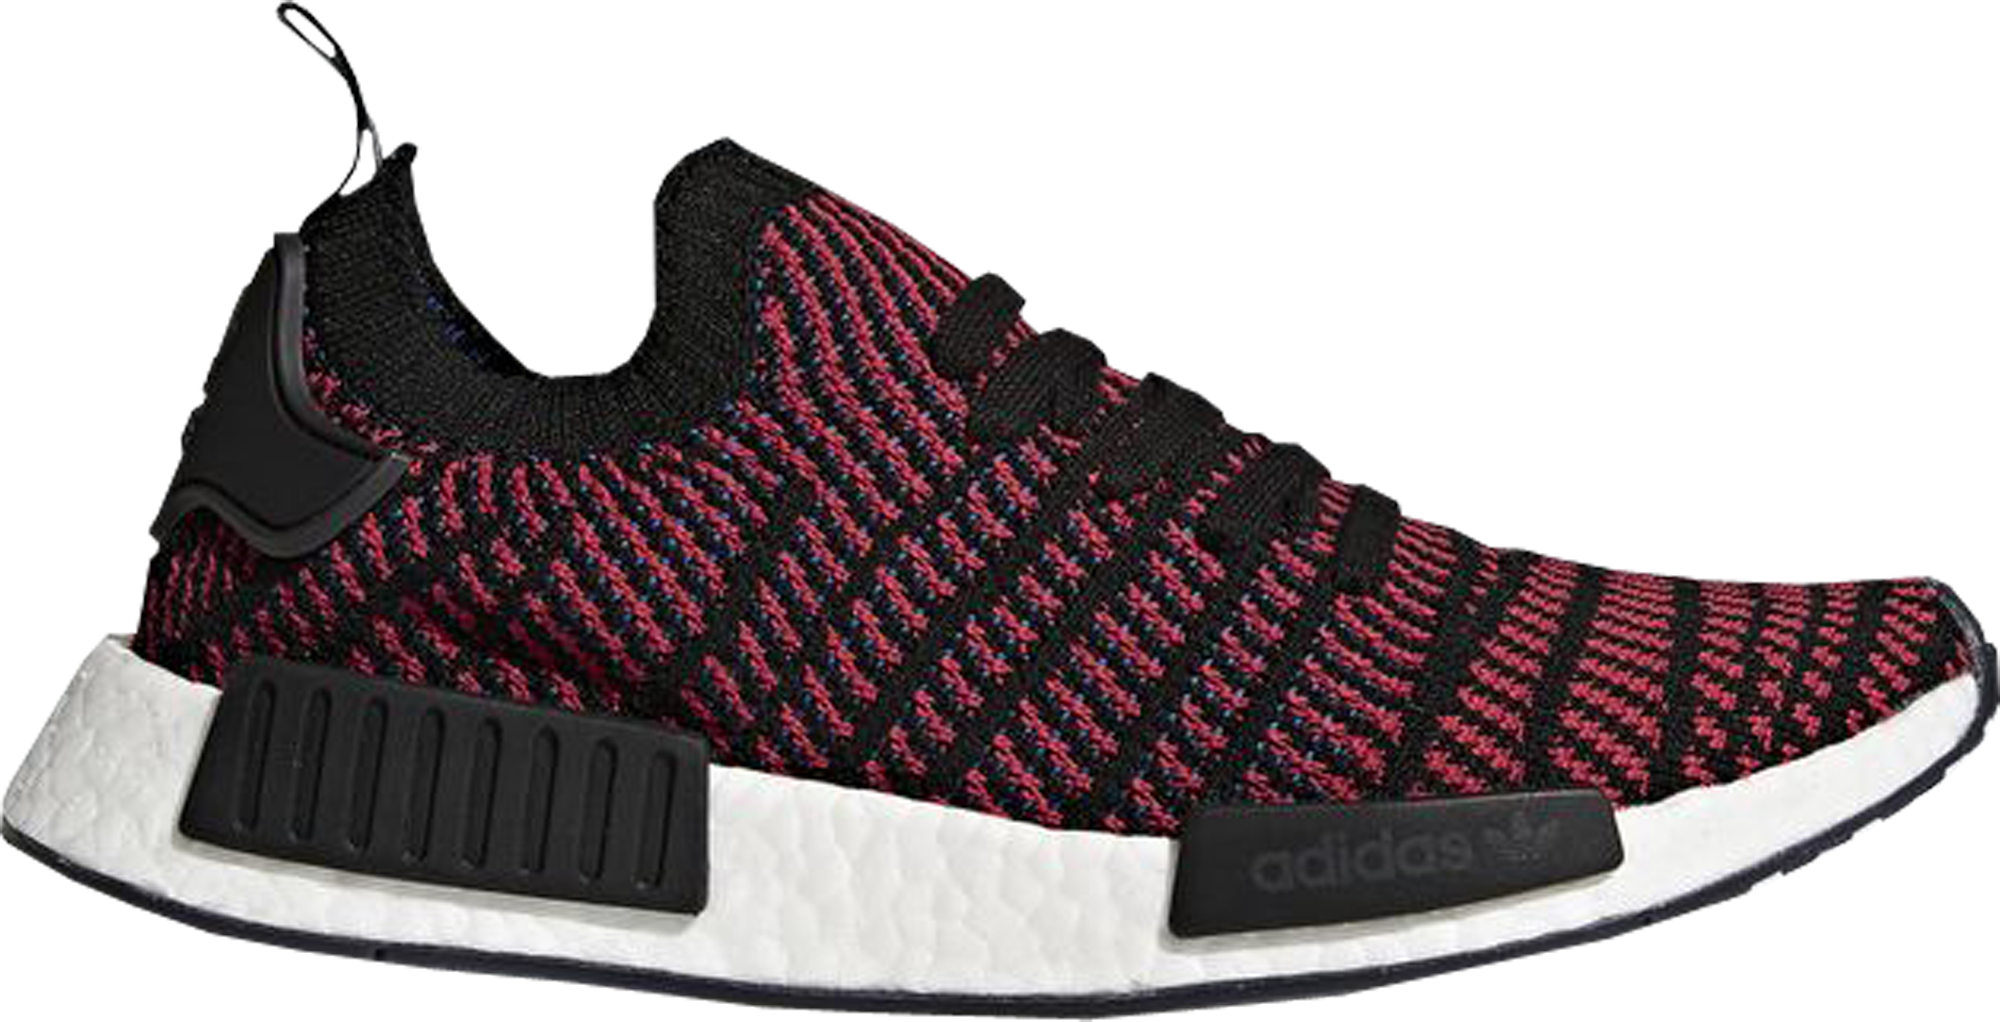 adidas nmd r1 black with red